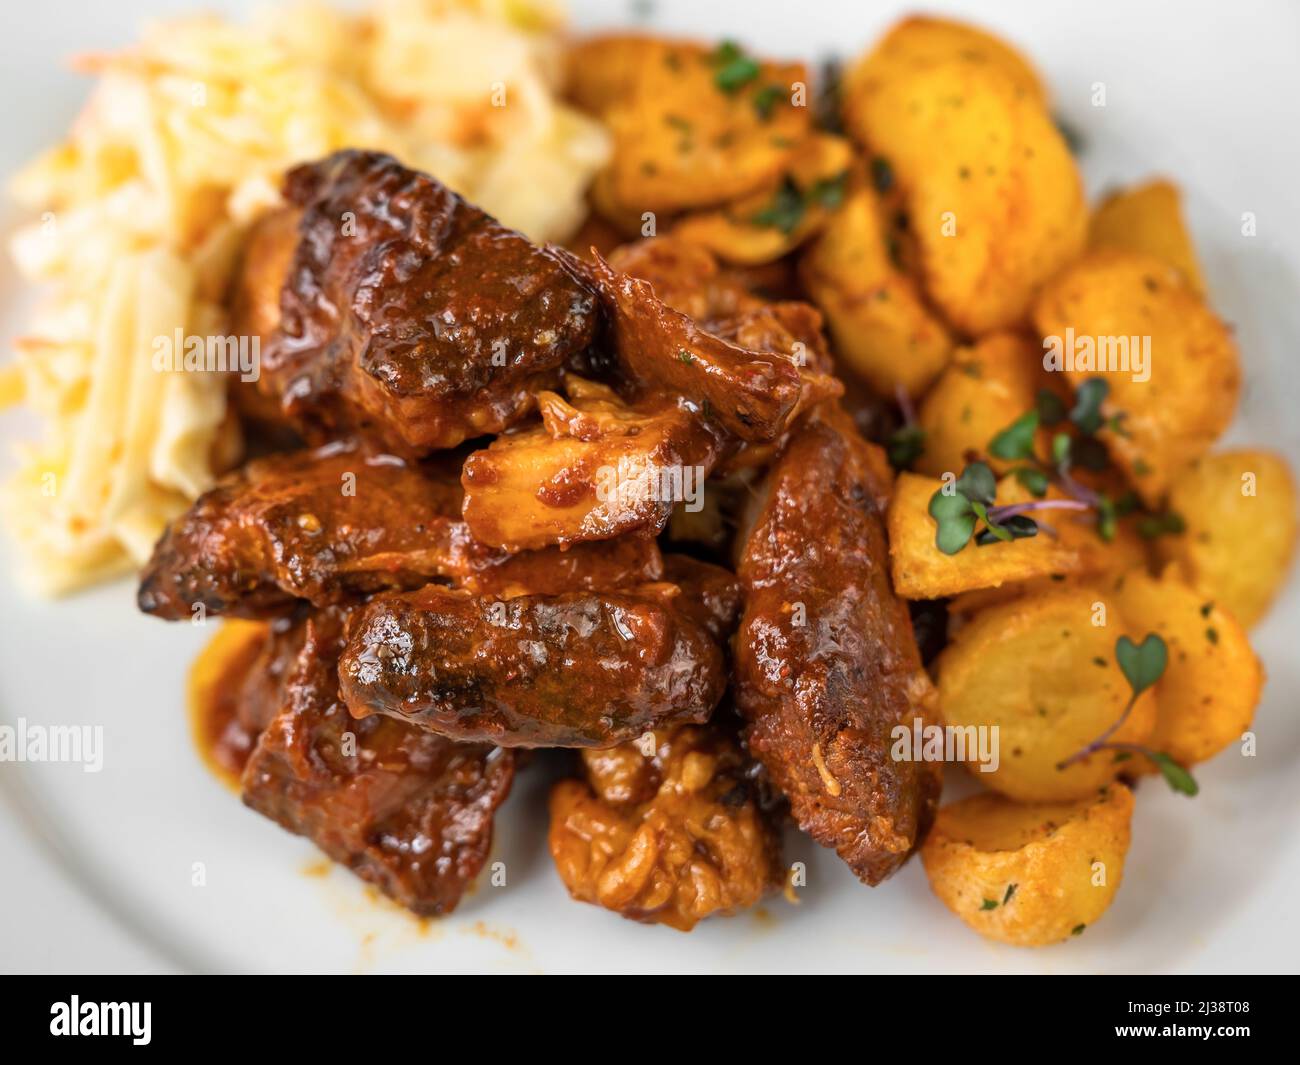 Baked marinated sliced turkey meat in wild gypsy sauce, fried potato and salad coleslaw on white plate, closeup. Stock Photo